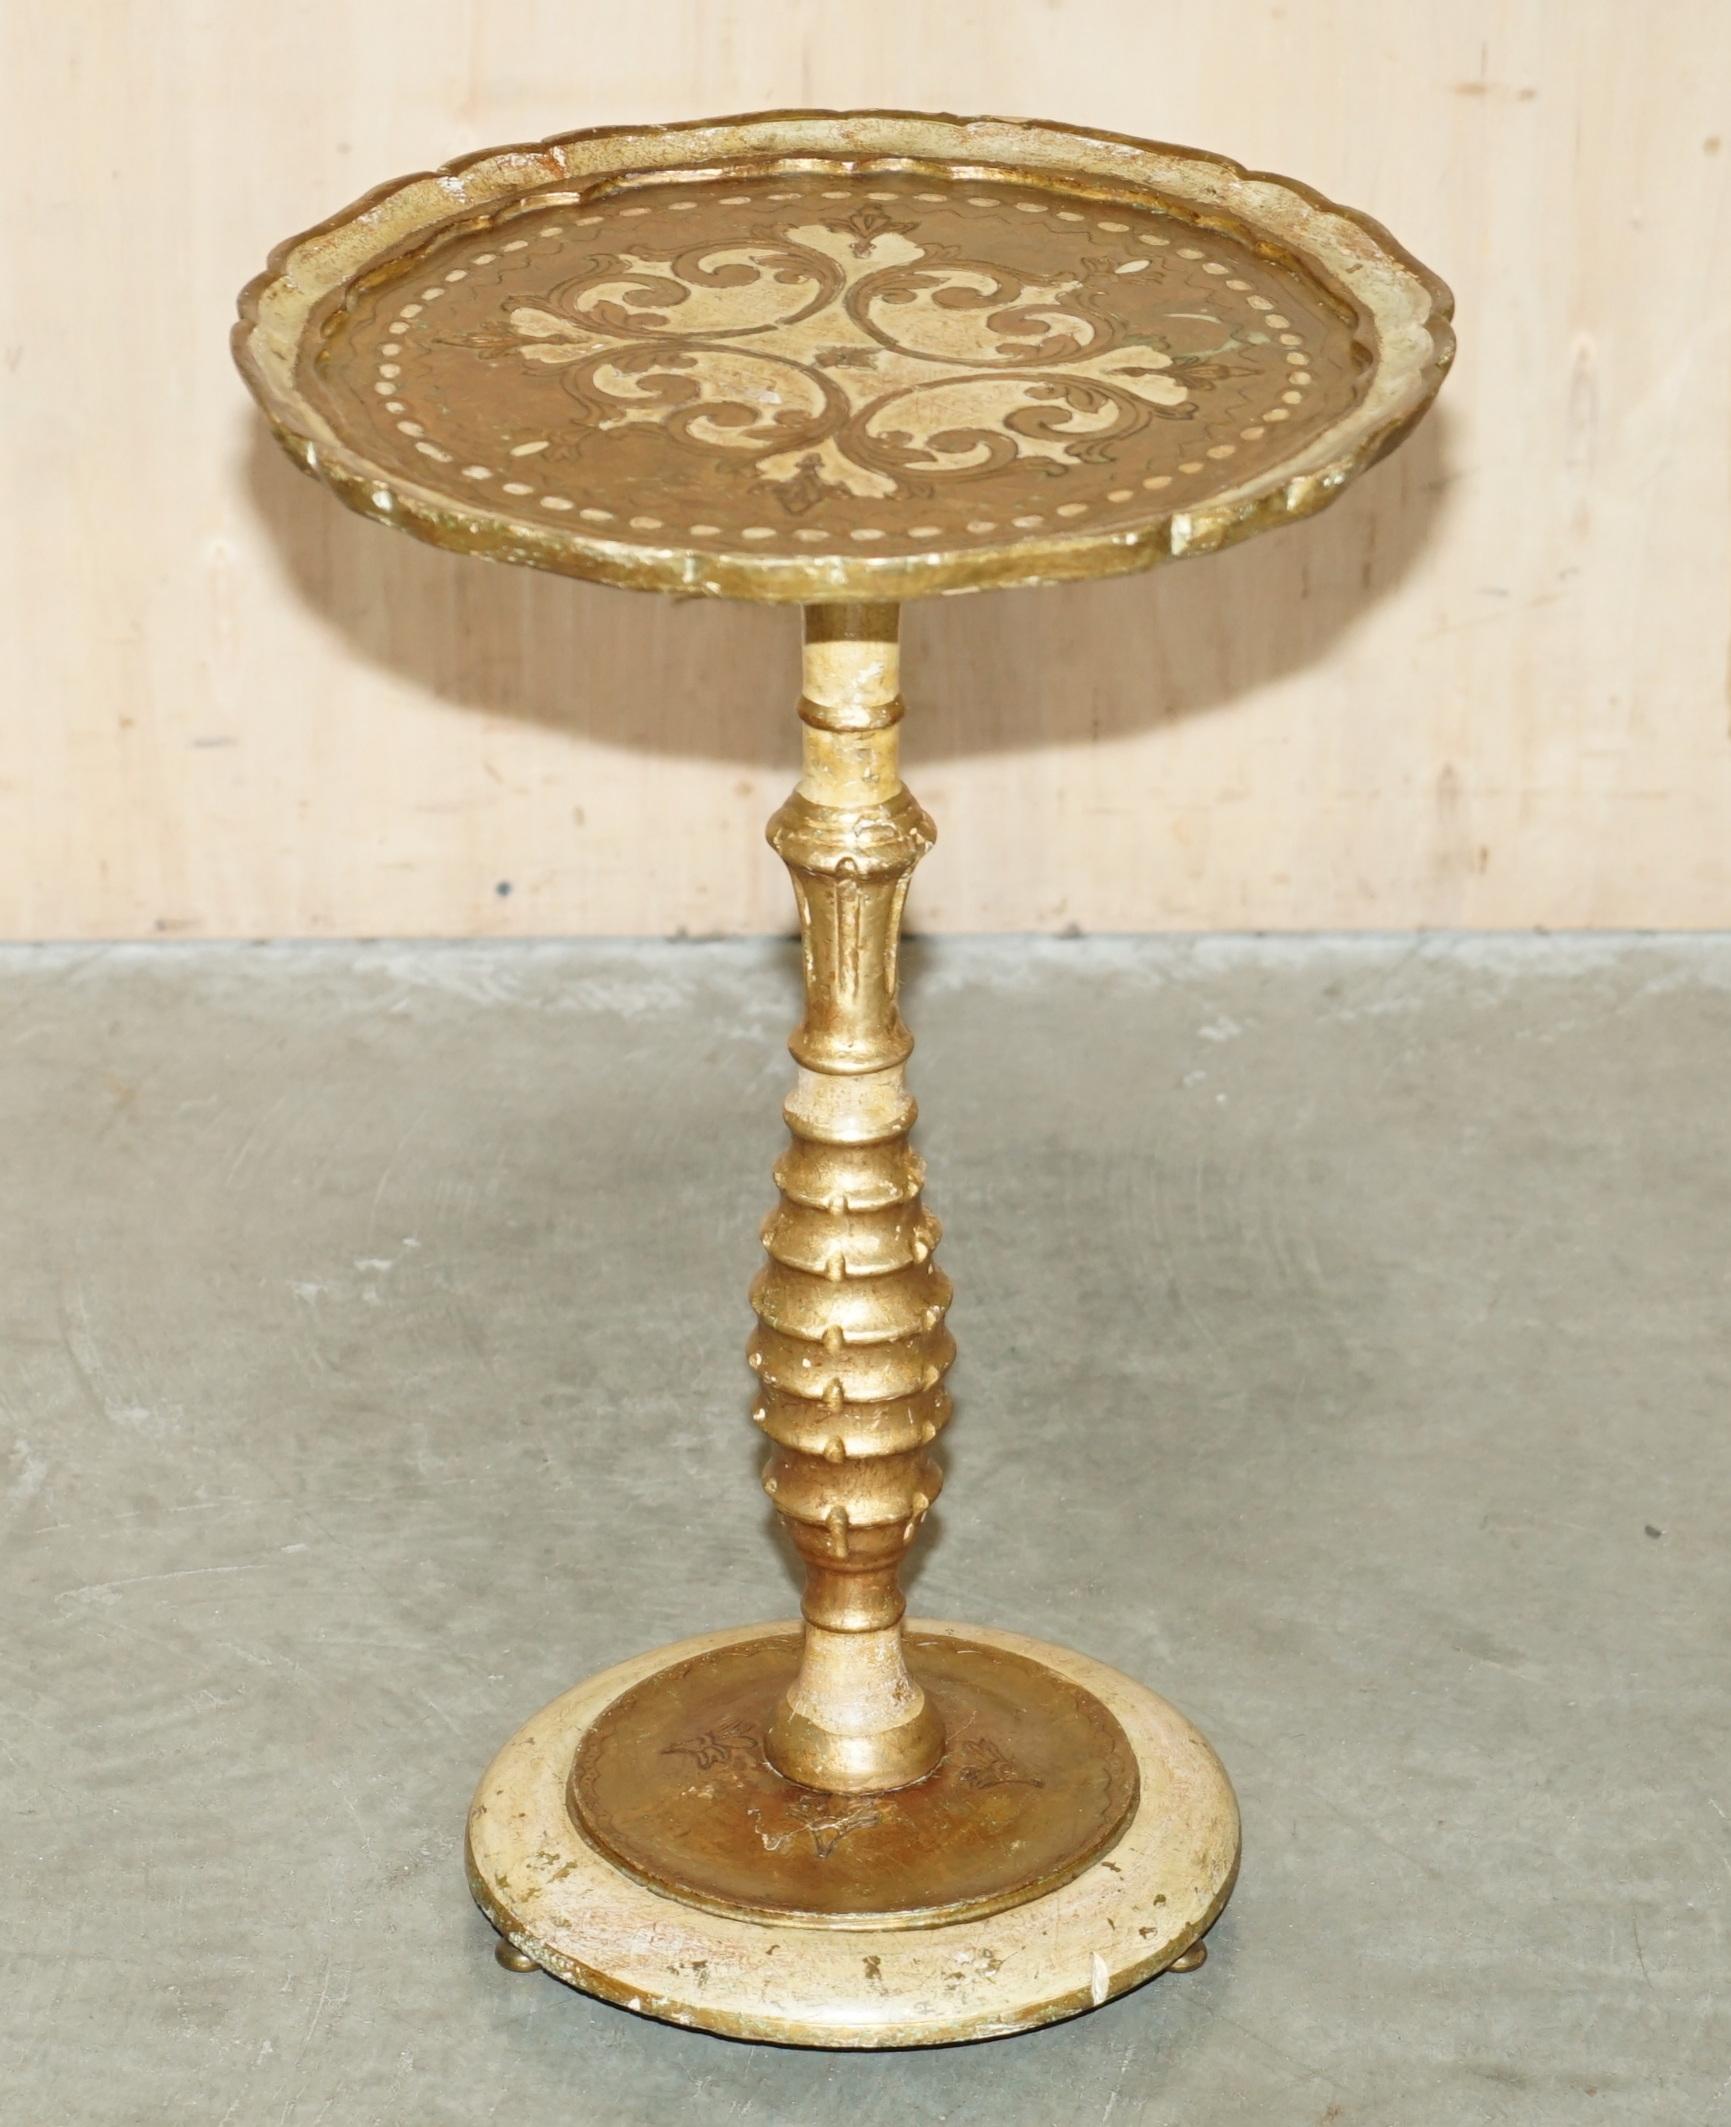 Royal House Antiques

Royal House Antiques is delighted to offer for sale this lovely Italian circa 1900 Polychrome painted side table with weighted base

Please note the delivery fee listed is just a guide, it covers within the M25 only for the UK